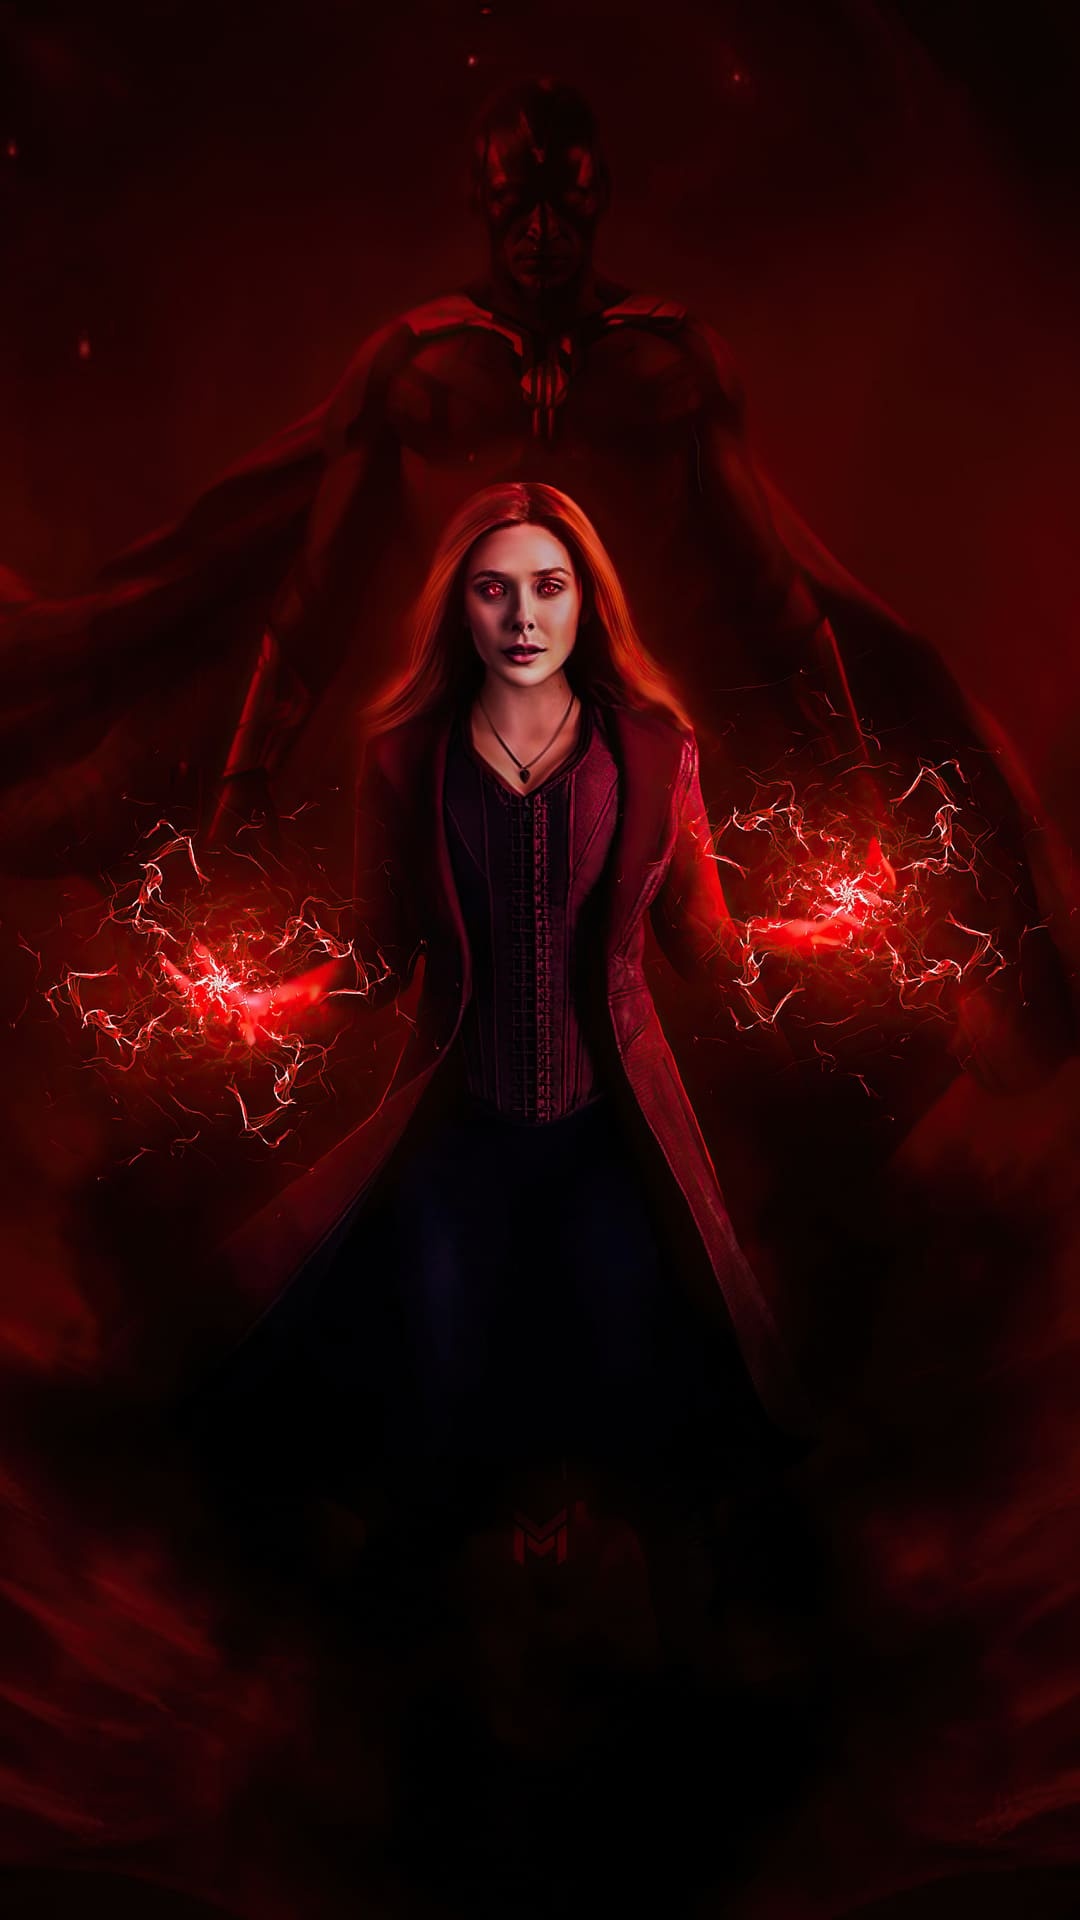 Scarlet Witch, Top Scarlet Witch wallpapers, High-resolution backgrounds, Downloadable images, 1080x1920 Full HD Handy